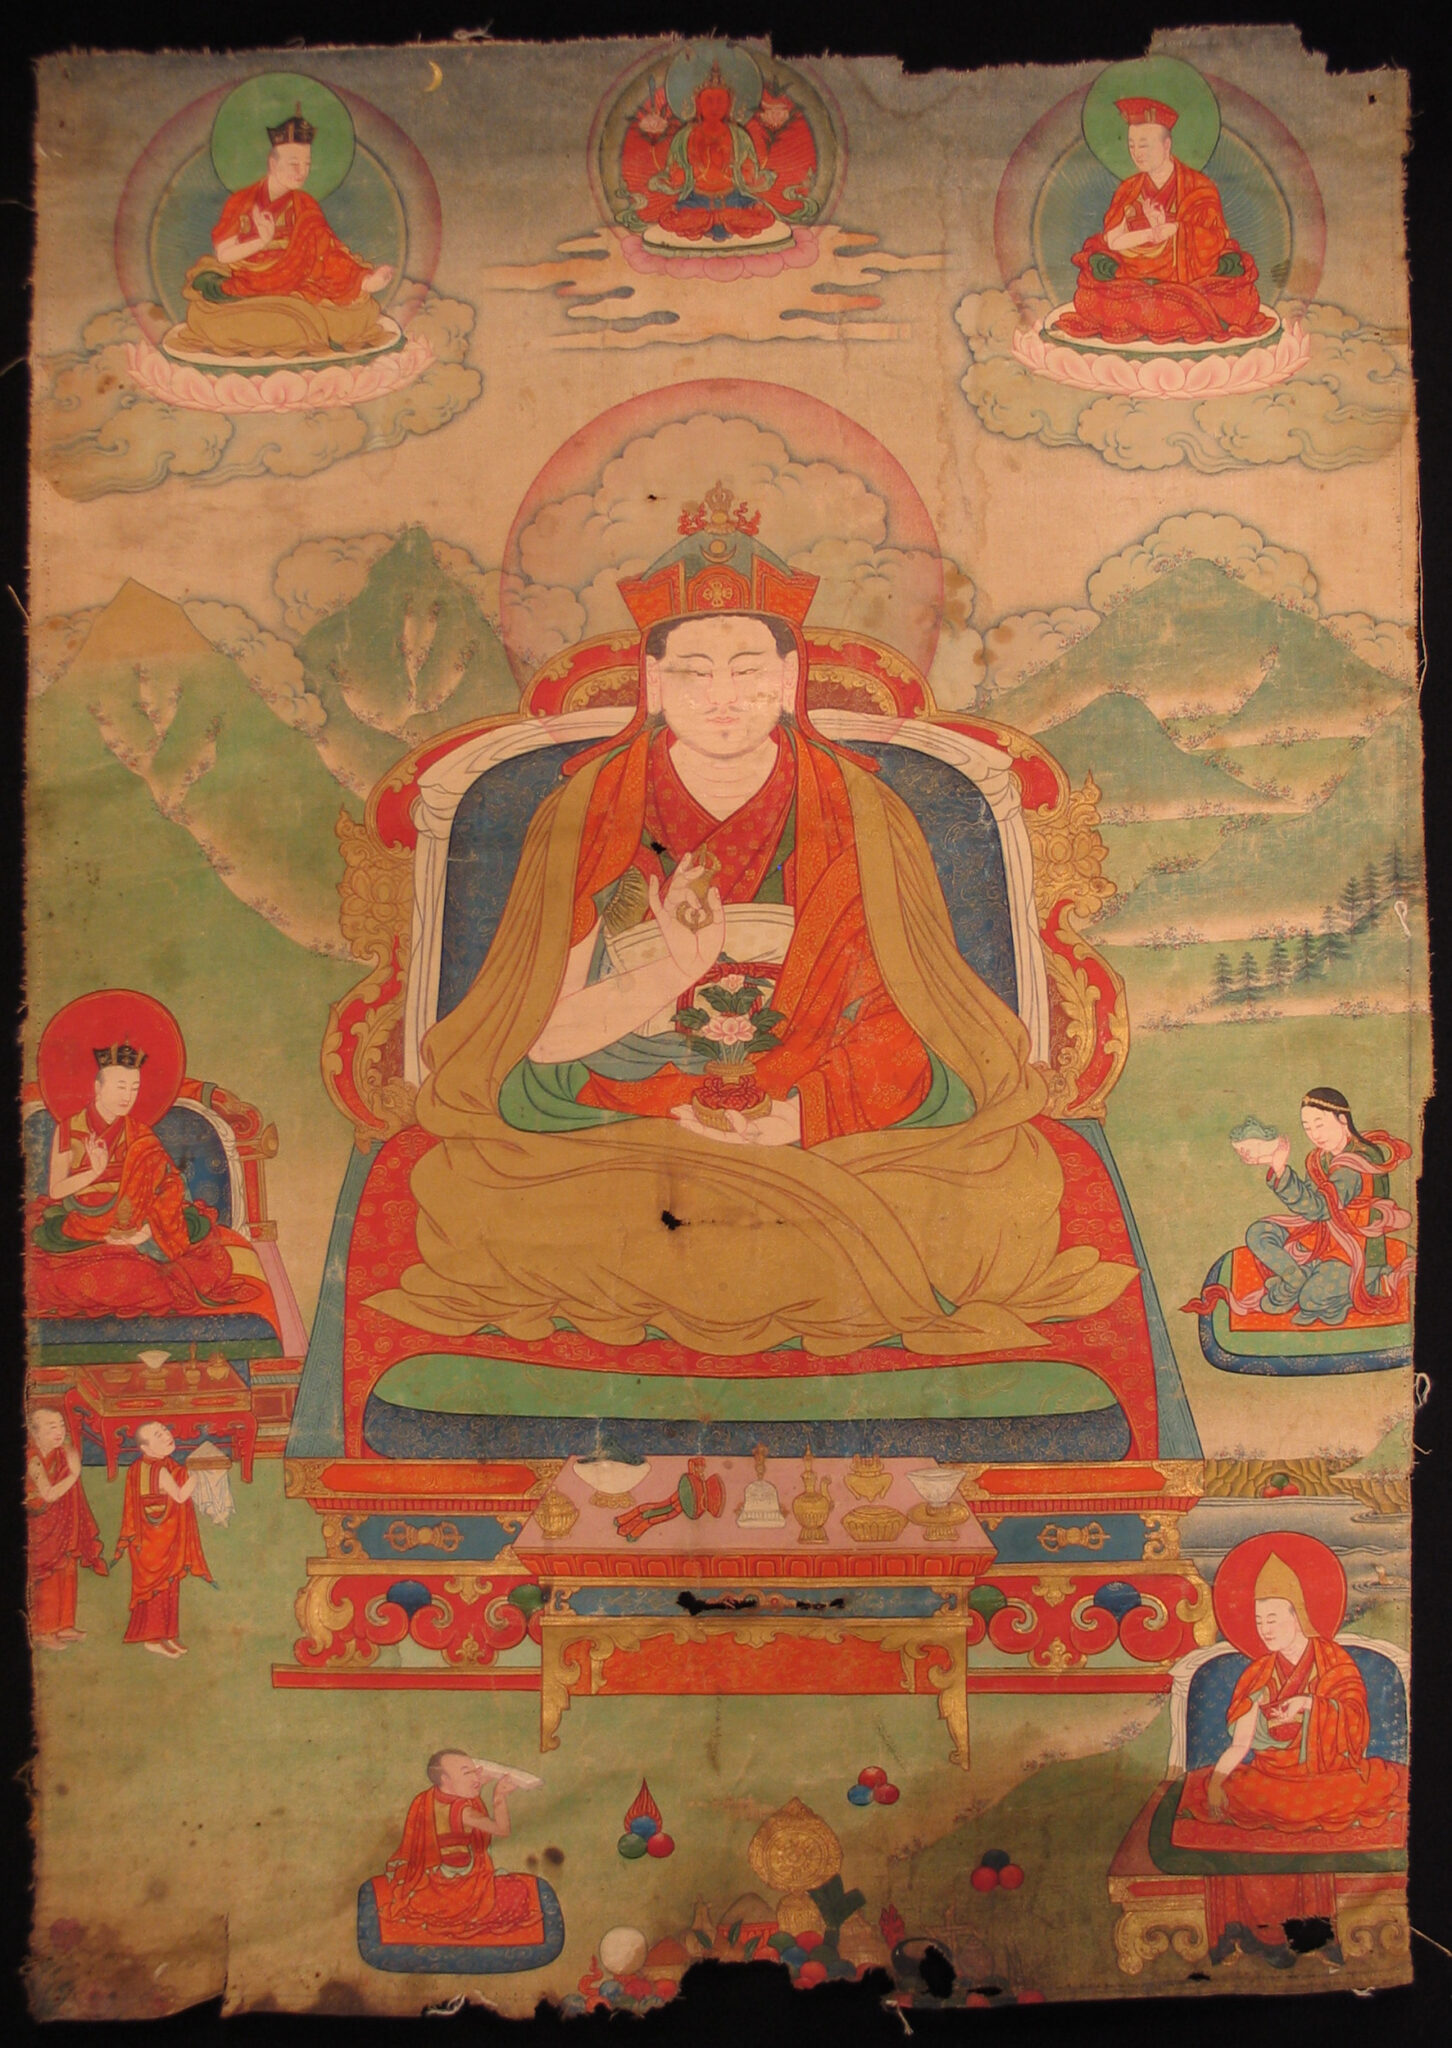 Lama seated on throne with vajra in left hand, suspended above mountainous landscape, surrounded by portraits